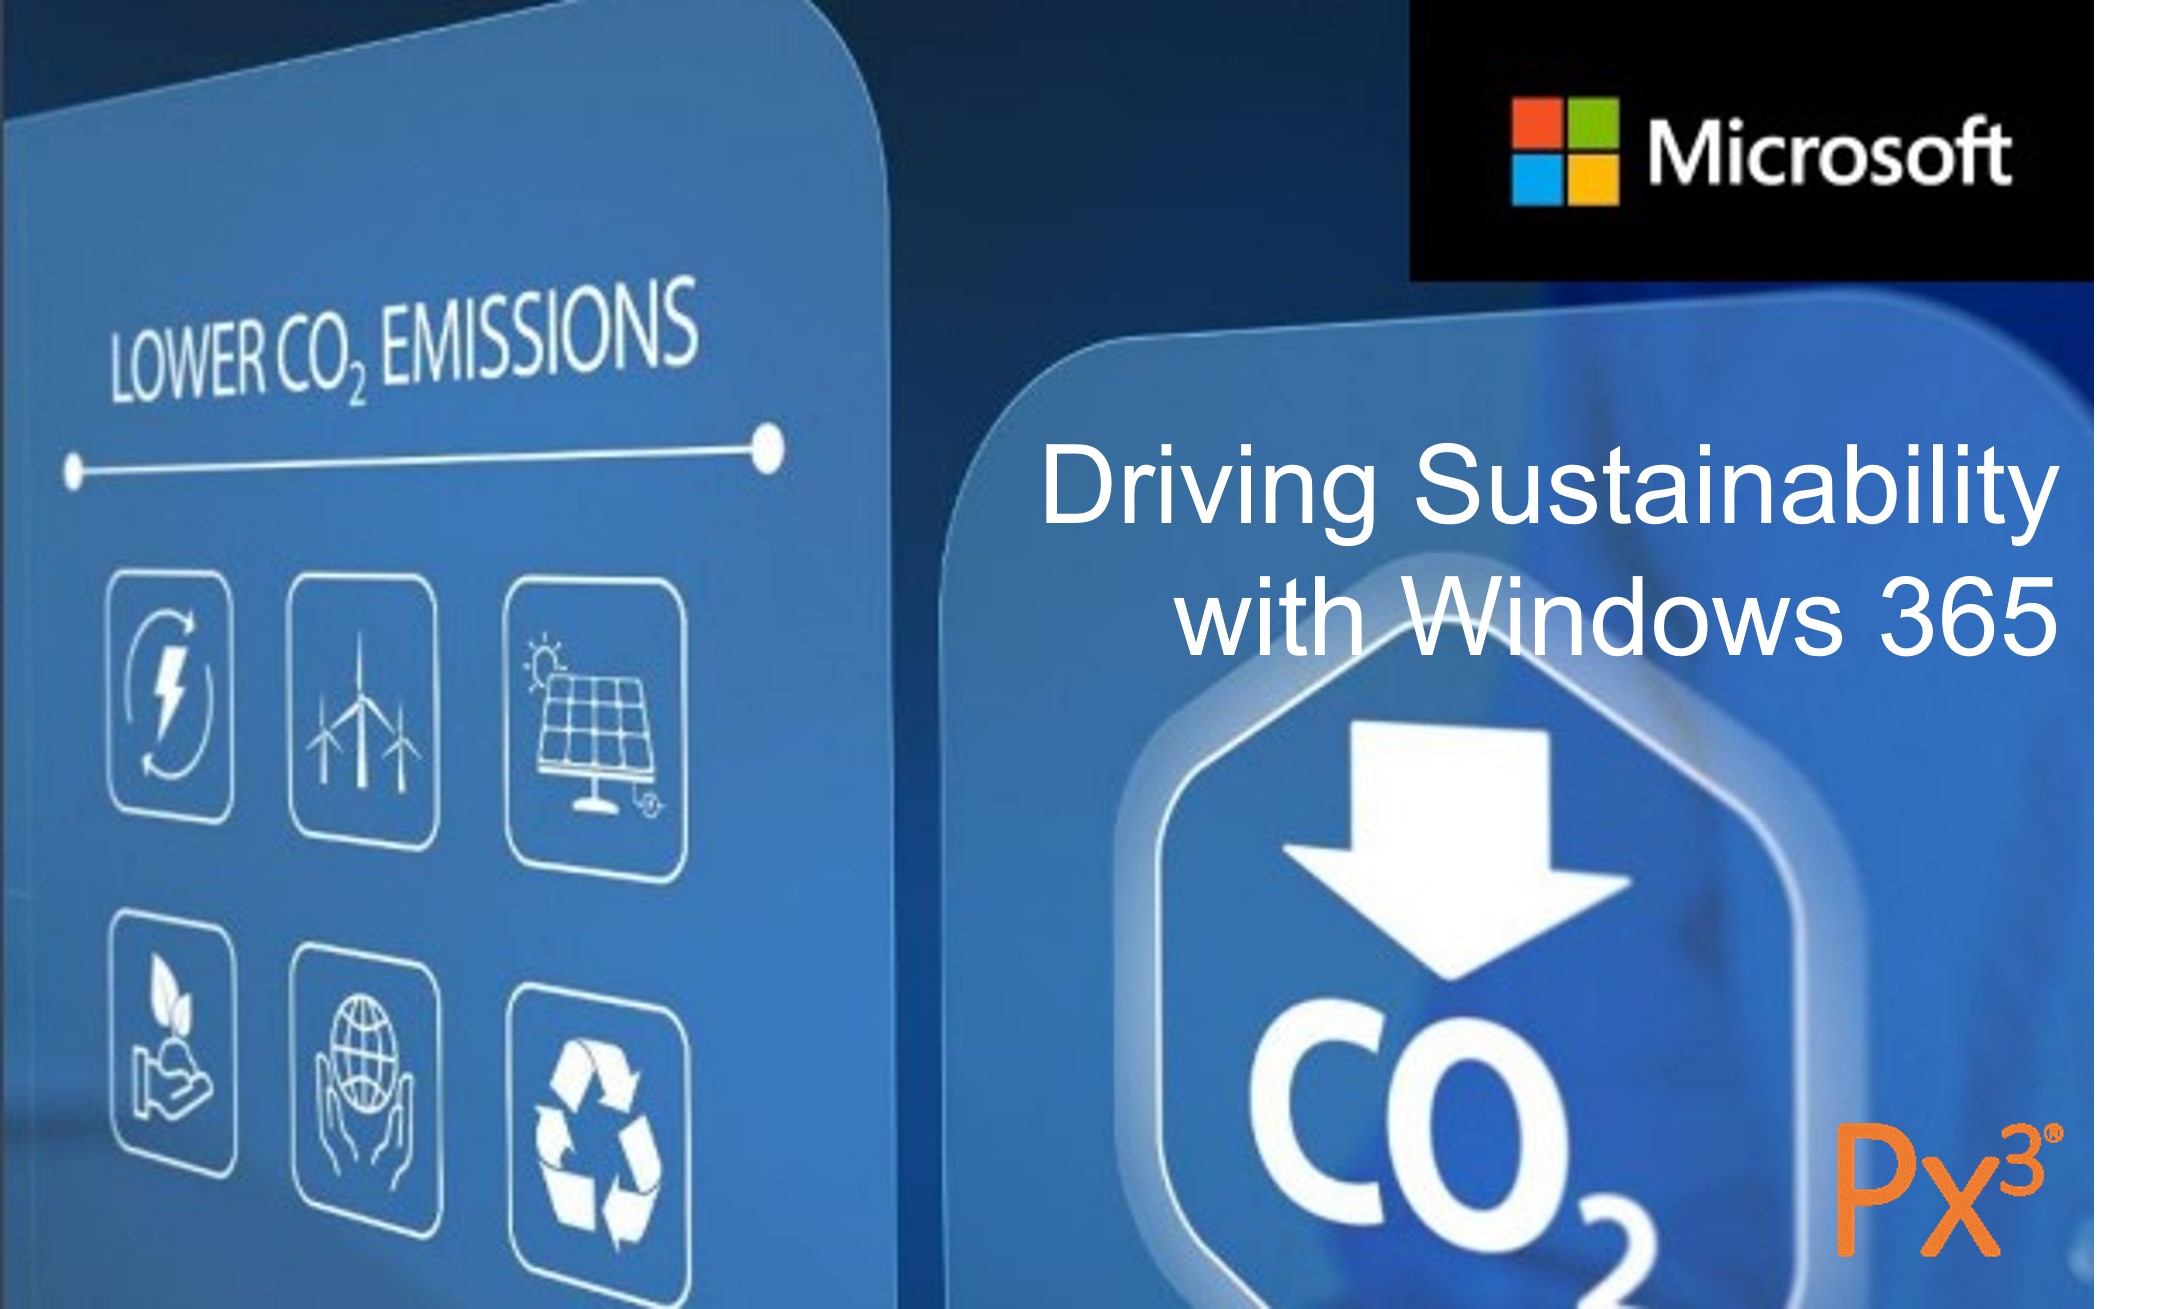 Dr. Sutton-Parker conducts Microsoft’s W365 Cloud PC sustainability research